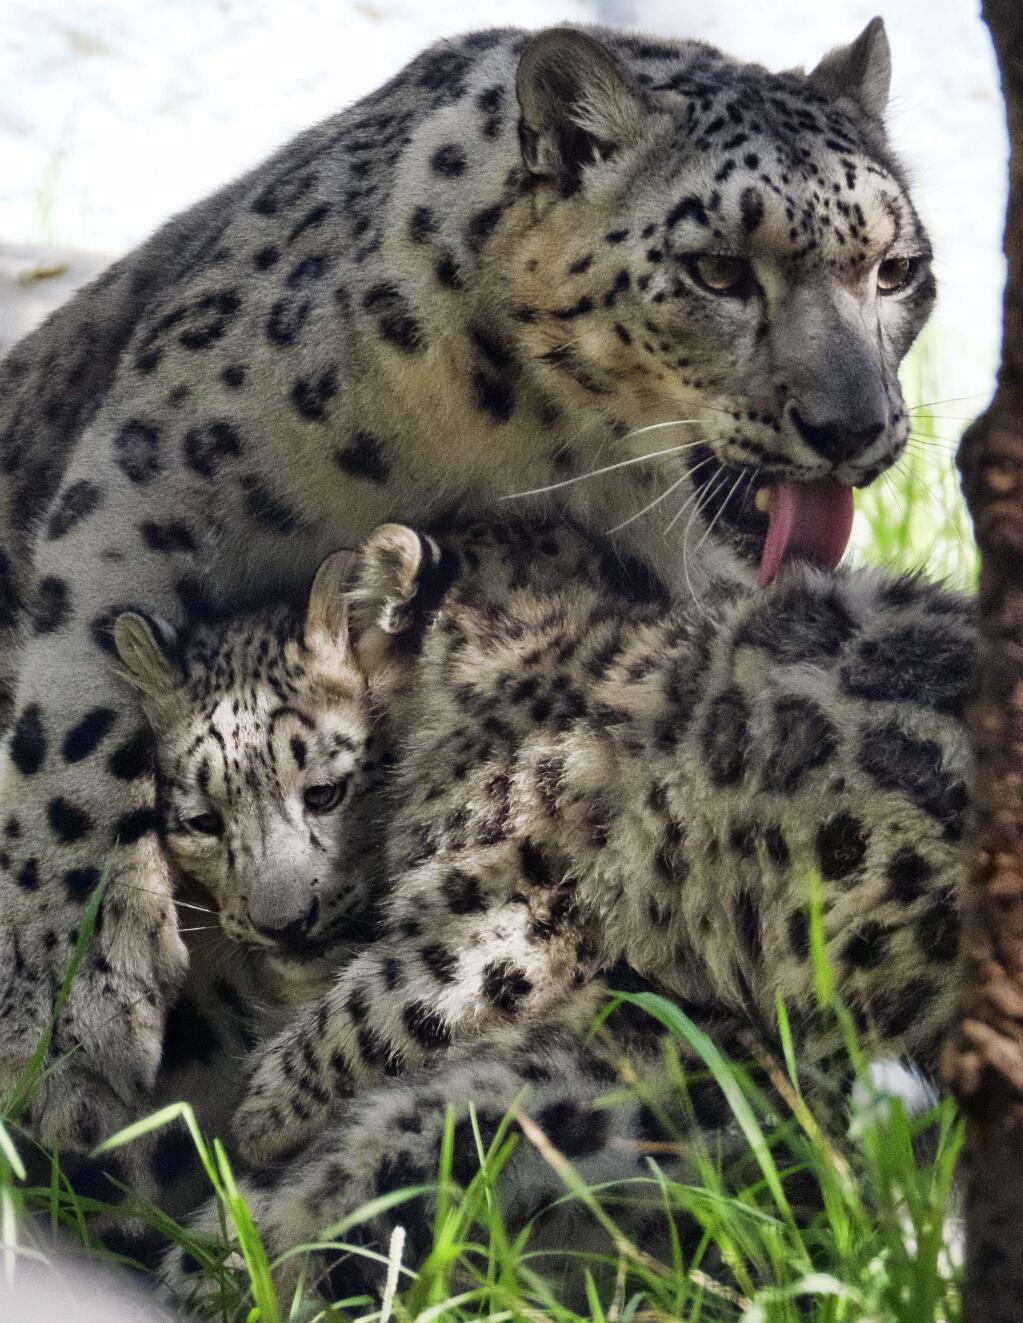 Endangered snow leopard Georgina, grooms one of her twin cubs in their enclosure at the Los Angeles Zoo on Tuesday, Sept. 12, 2017. Brother and sister snow leopard kittens romped and rough-housed as they made their public debut Tuesday. The fuzzy siblings, born in May, explored their outdoor habitat as their mother Georgina and zoo visitors looked on. (AP Photo/Richard Vogel)